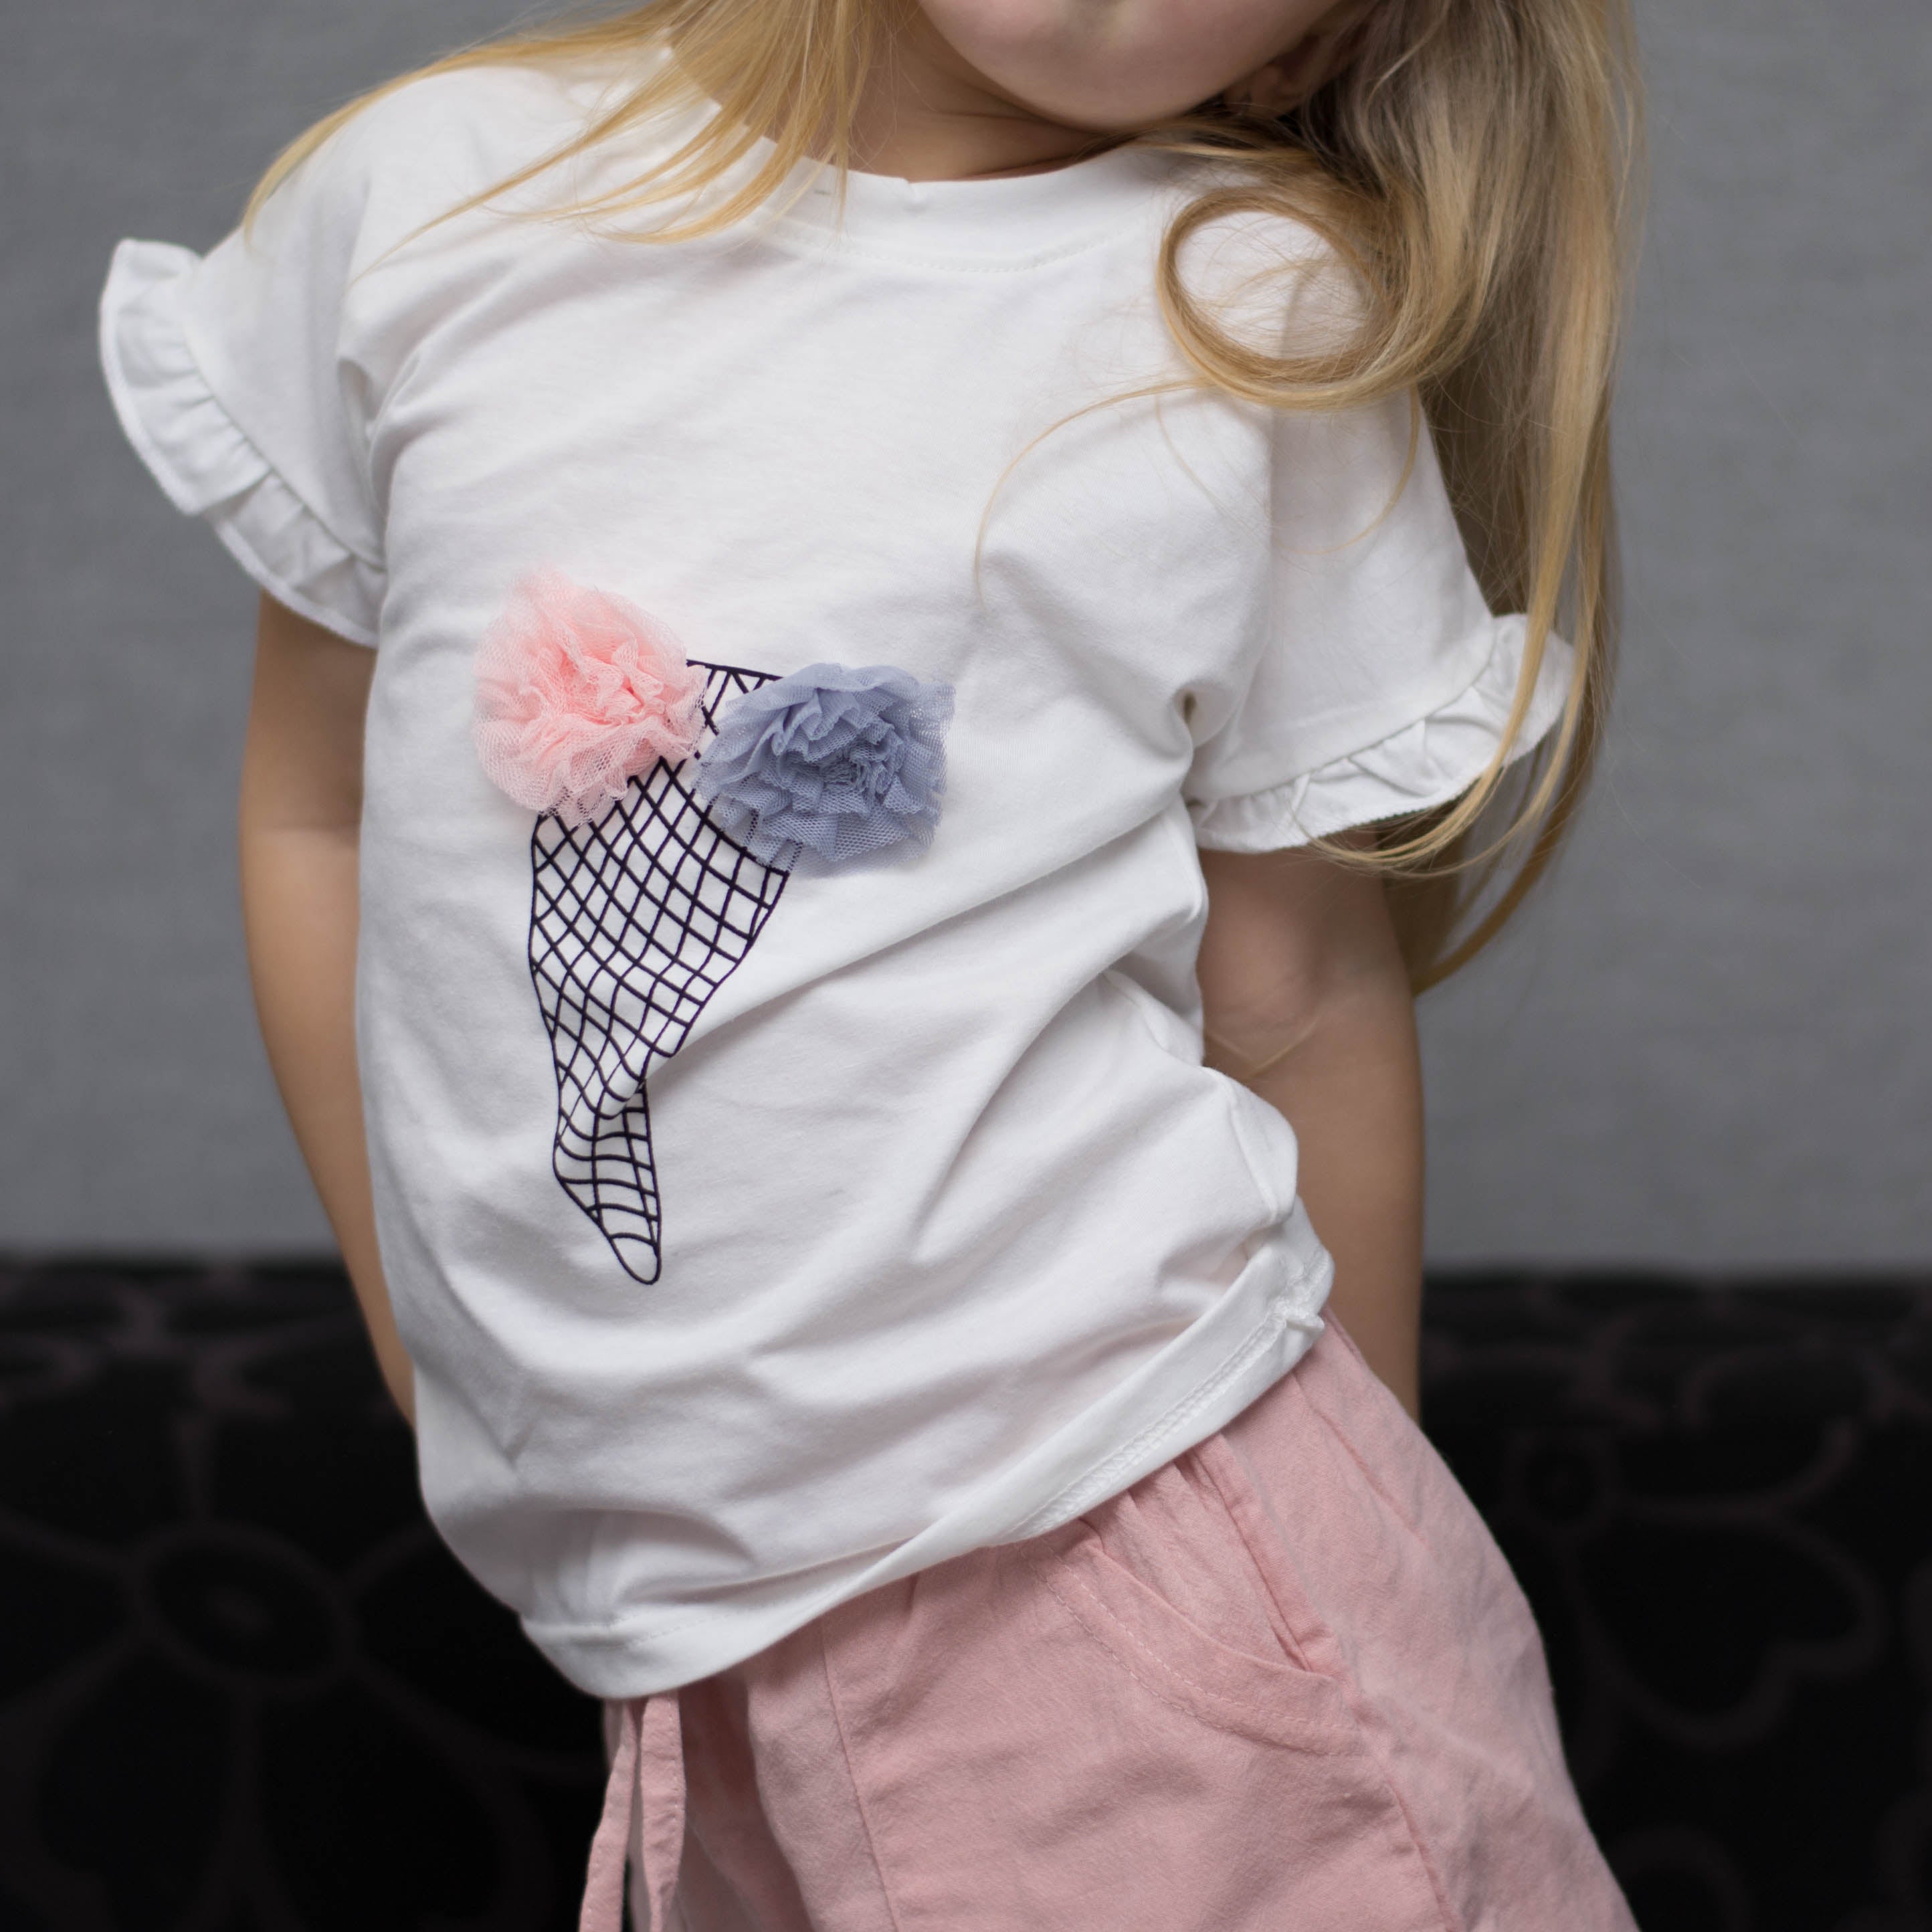 Icre Cream baby girl t-shirt and shorts set